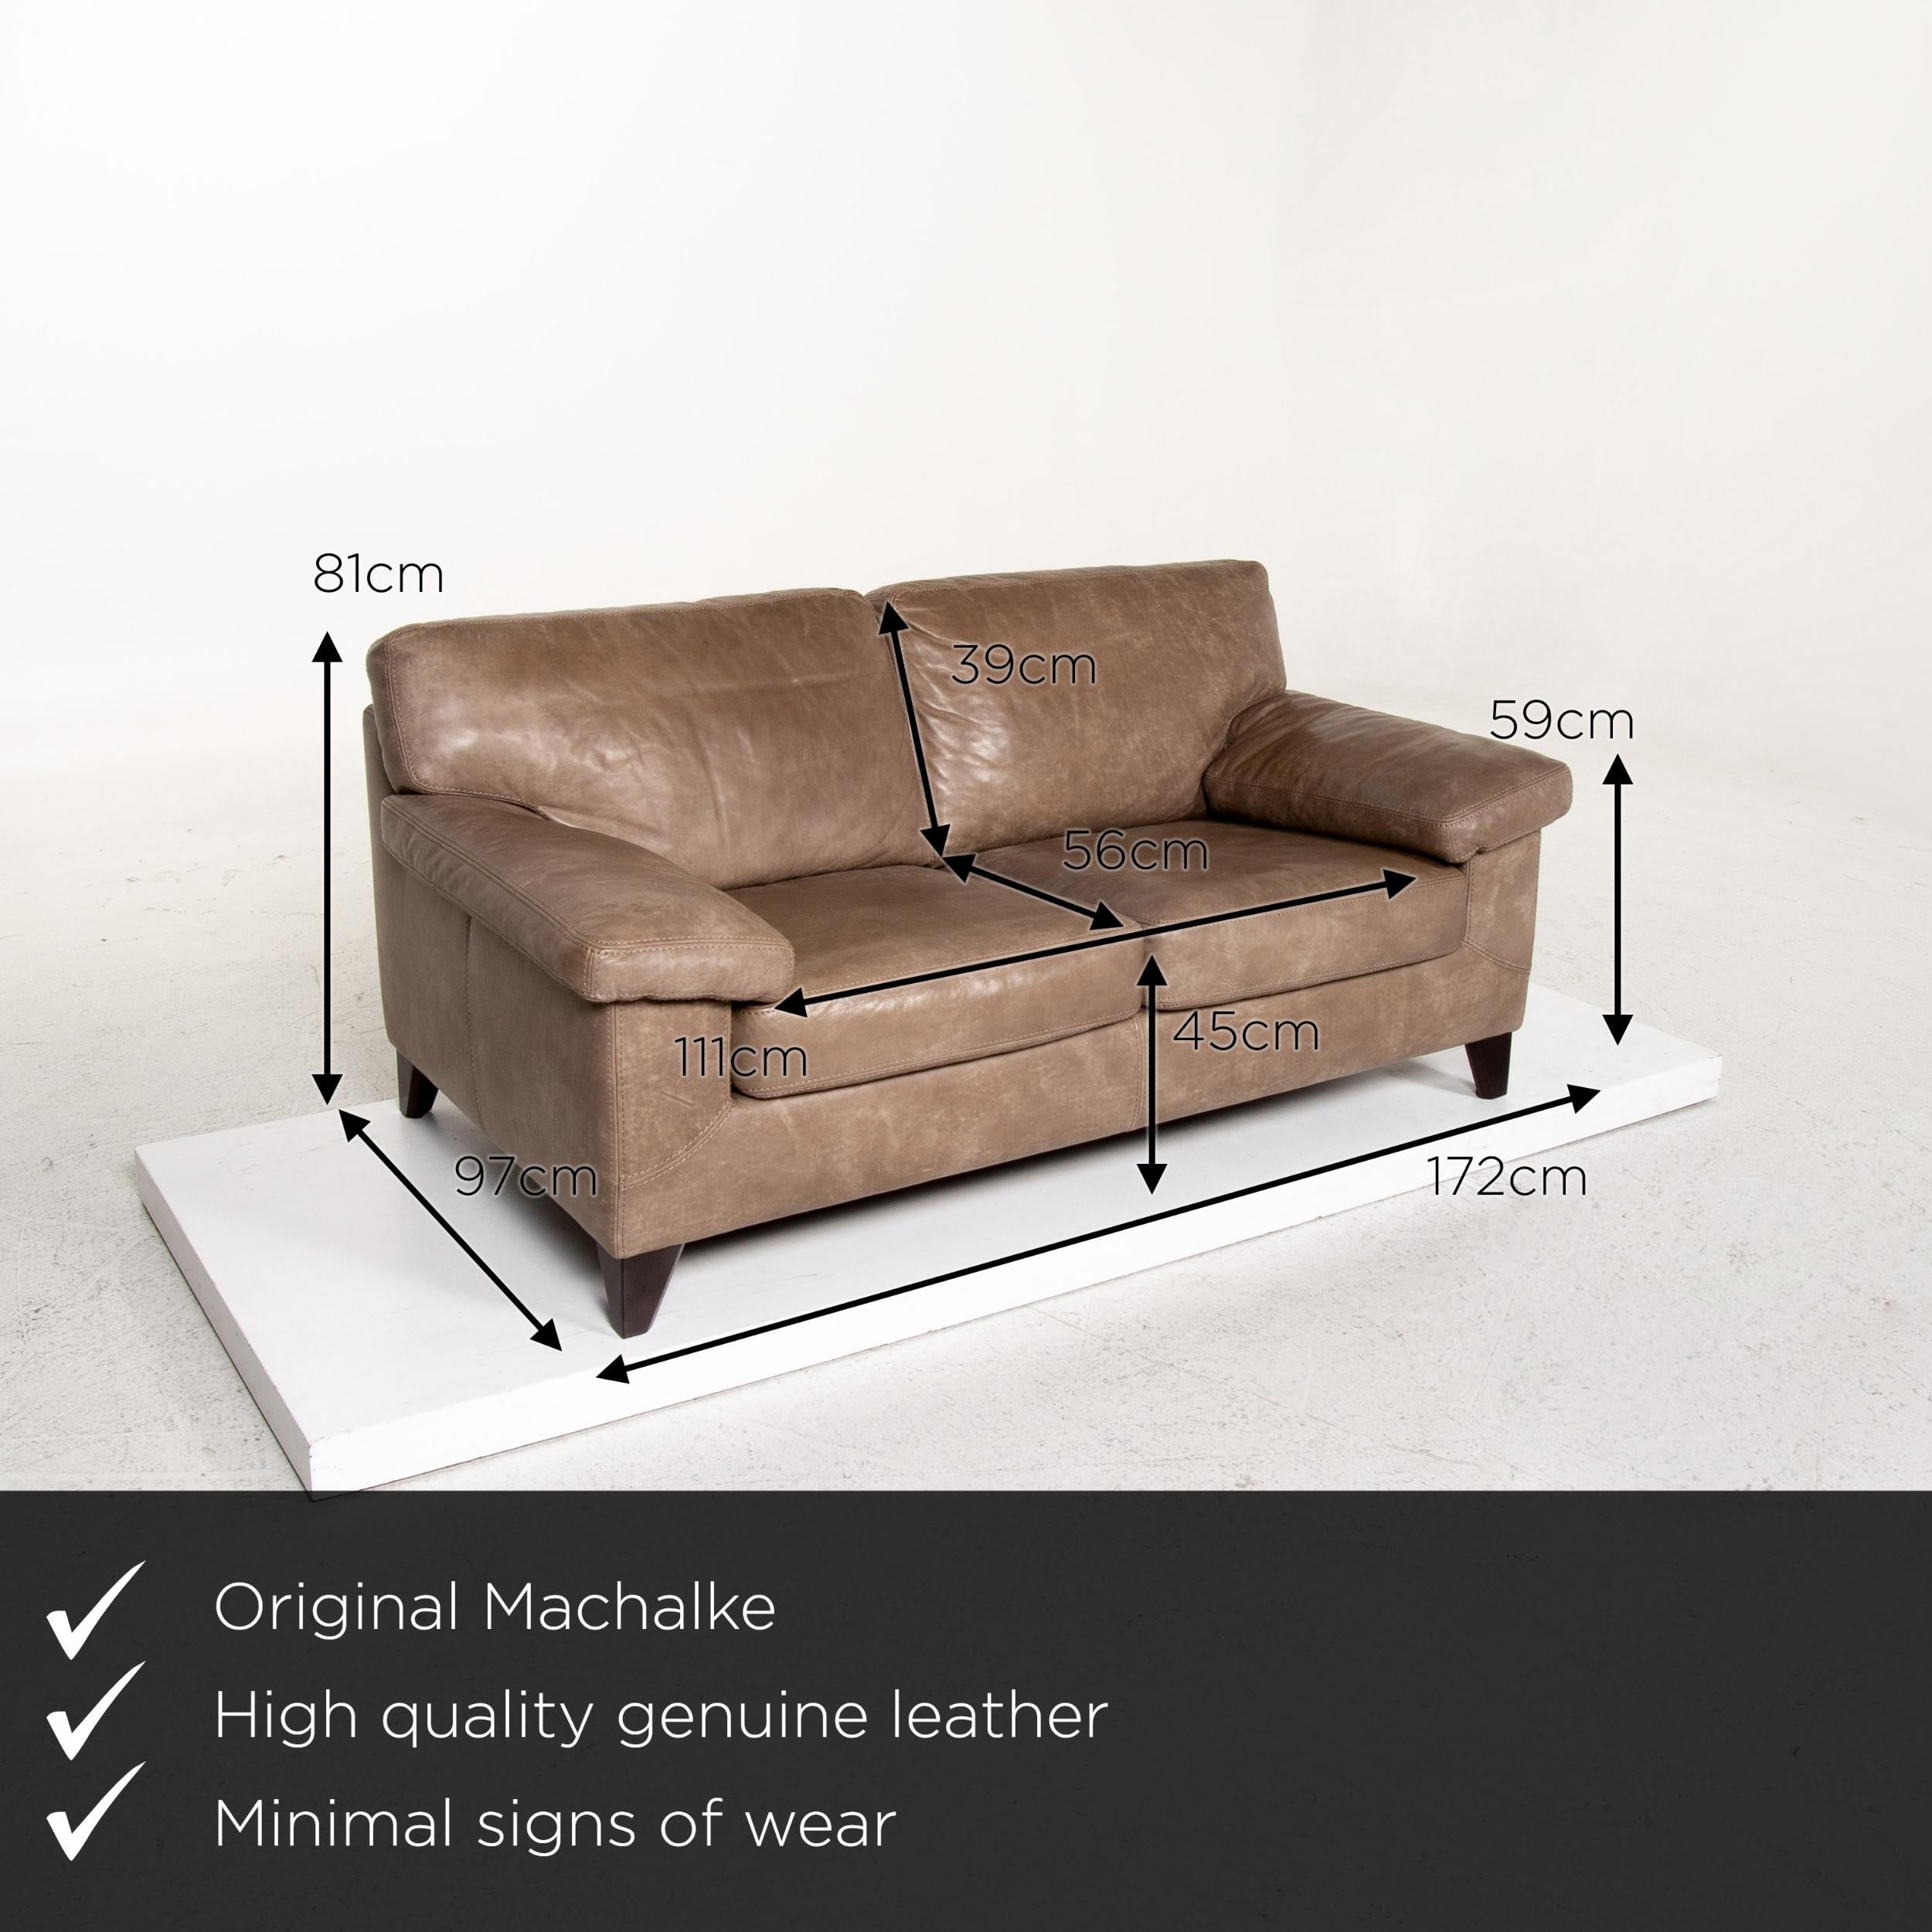 We present to you a Machalke Diego leather sofa brown two-seat couch Teun Van Zanten.


 Product measurements in centimeters:
 

Depth 97
Width 172
Height 81
Seat height 45
Rest height 59
Seat depth 56
Seat width 111
Back height 39.
 